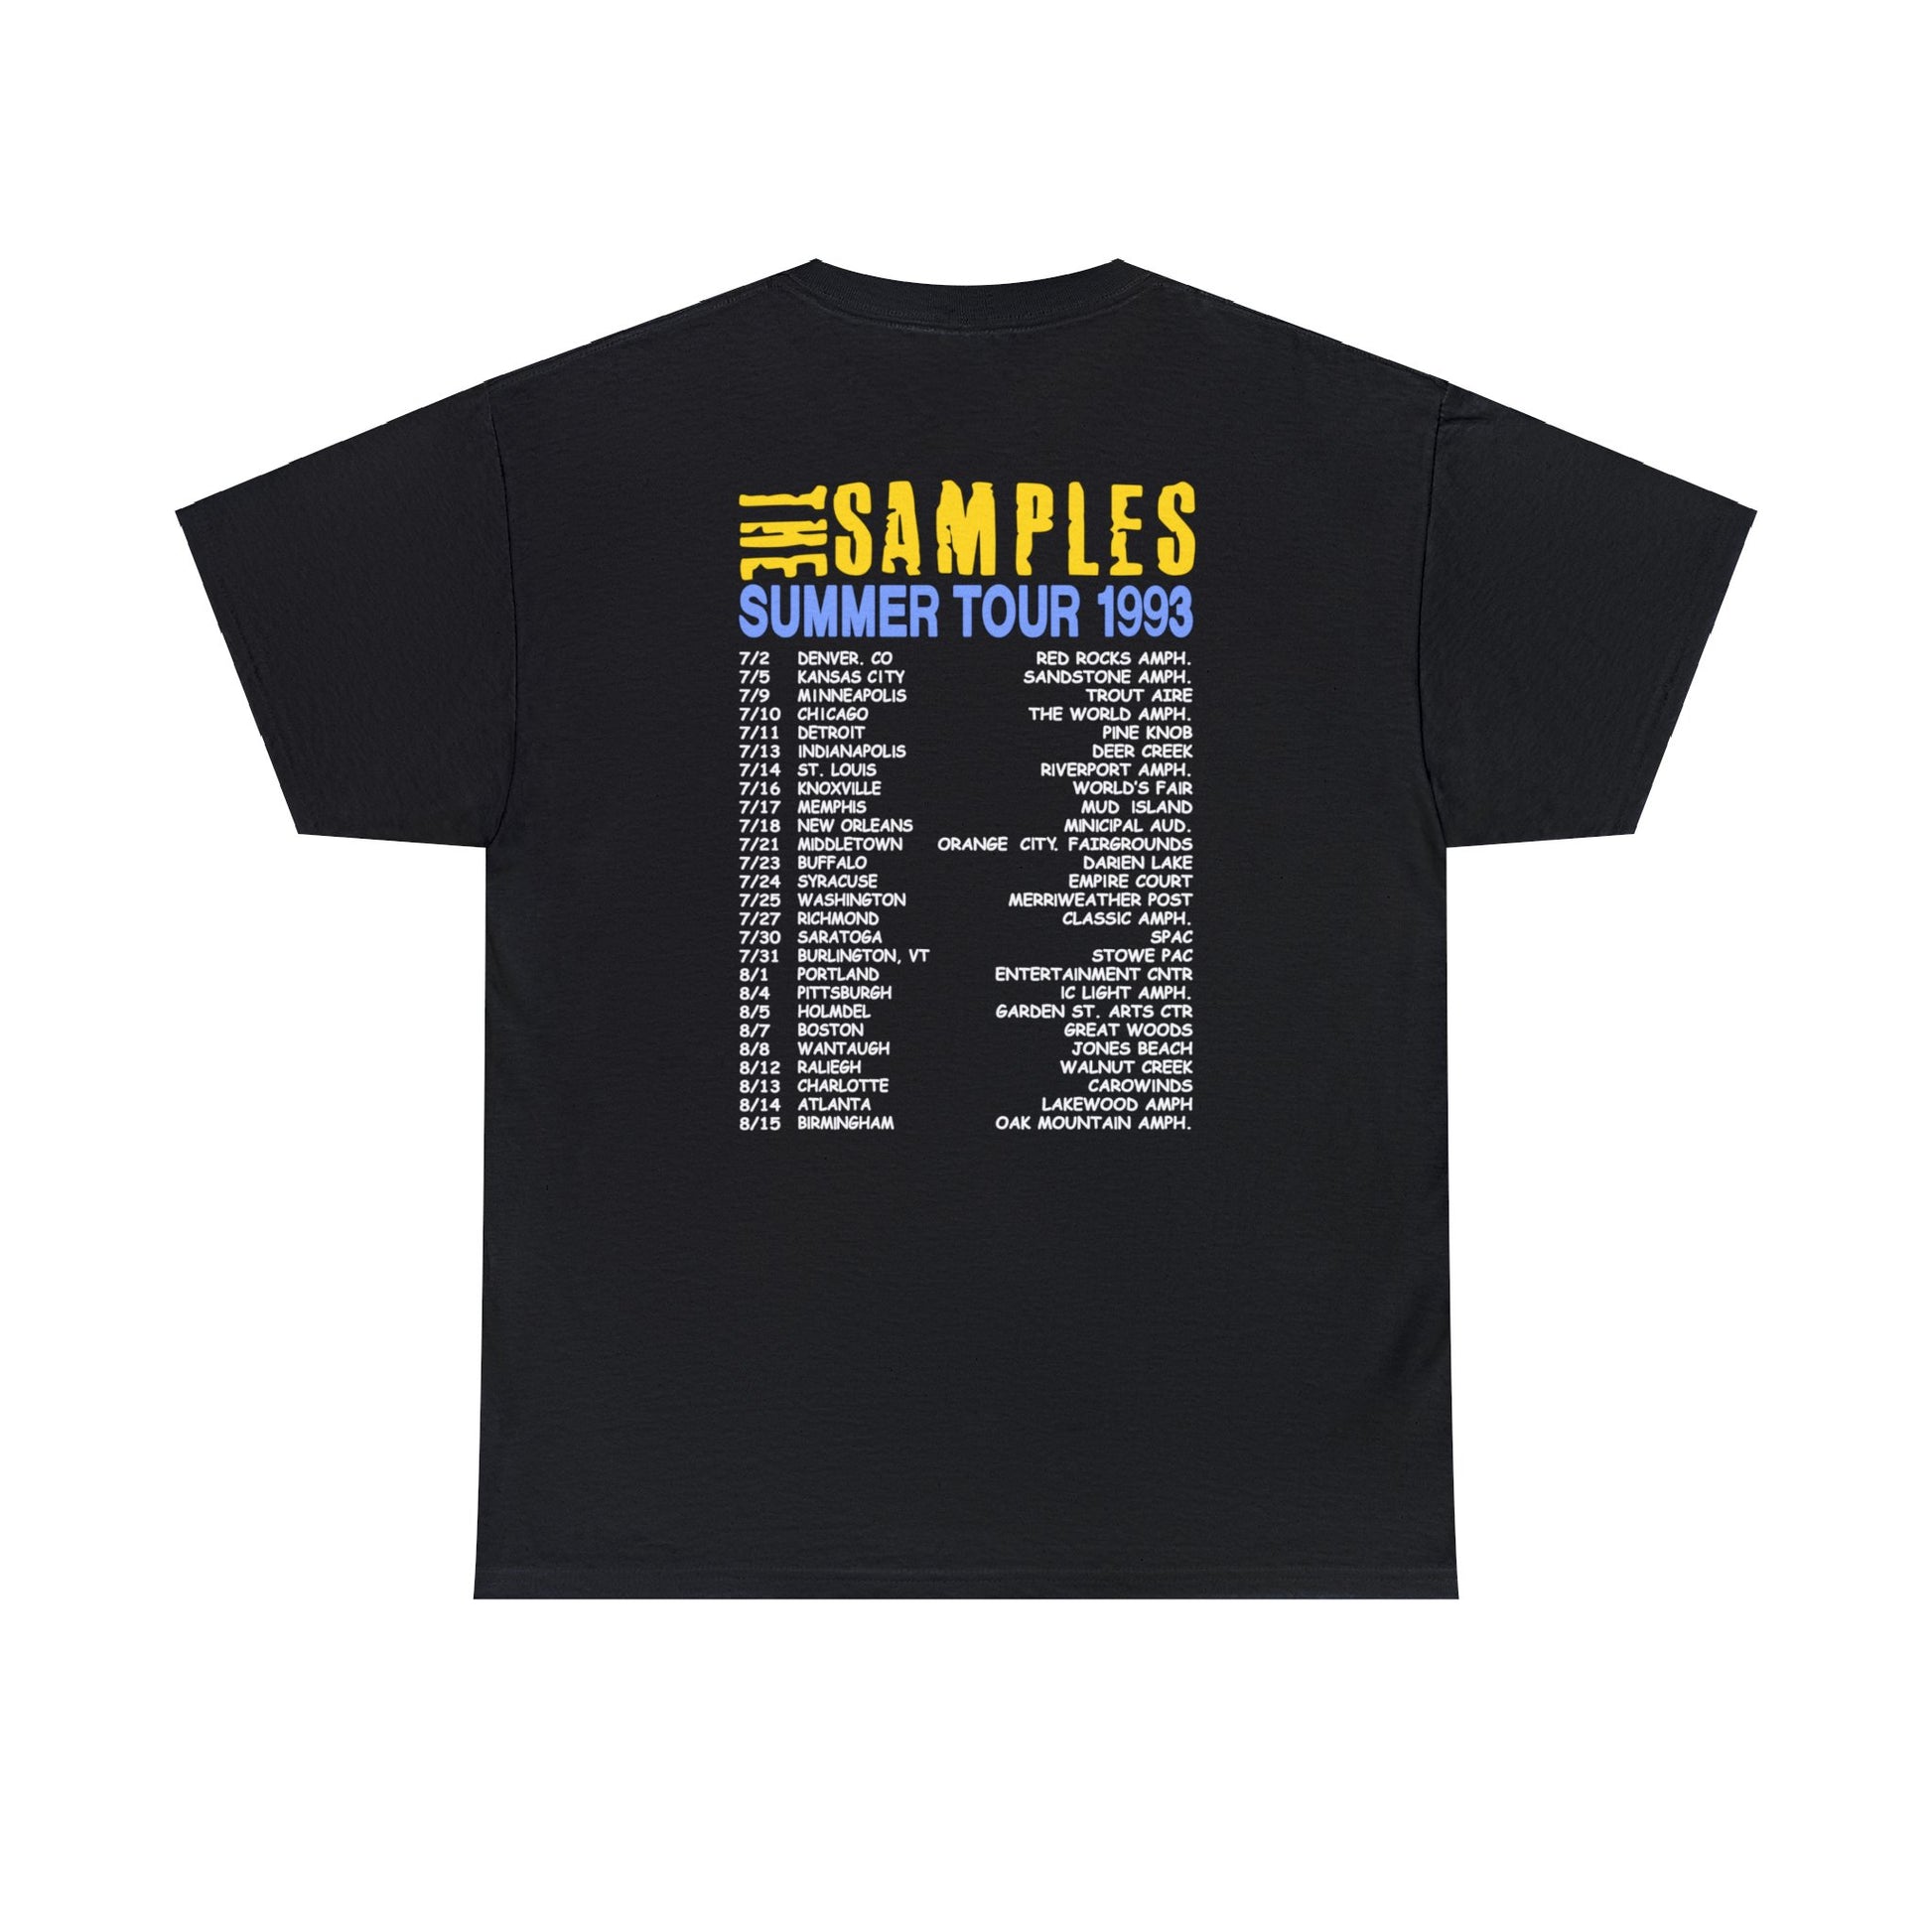 The Samples The Last Drag Summer Tour 1993 T-shirt for Sale